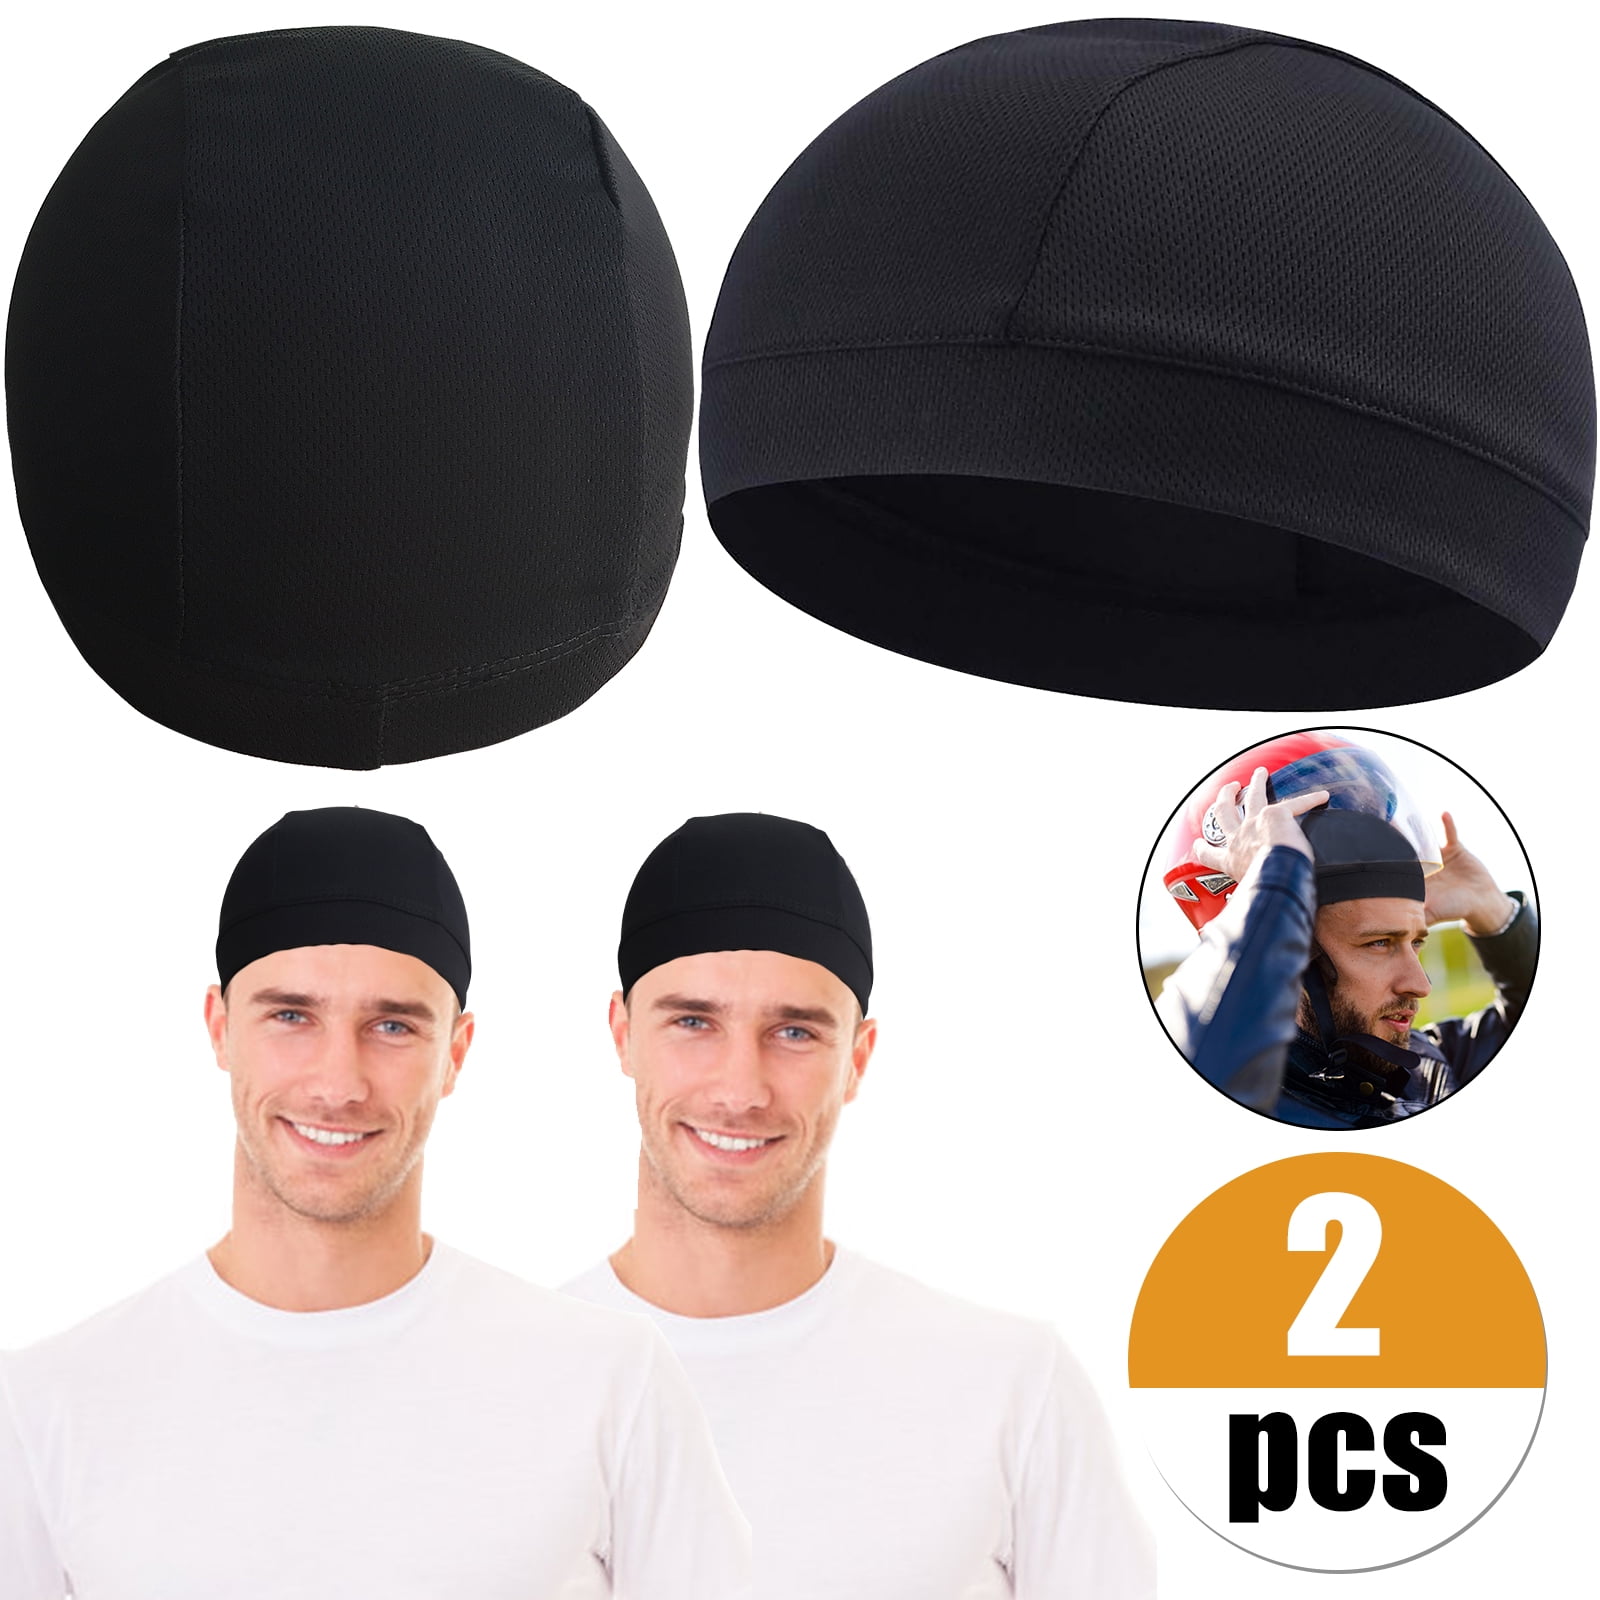 Helmet Liner Cap Cycling Sport Sweat Wicking Solid Yoga Headwear Stretchable